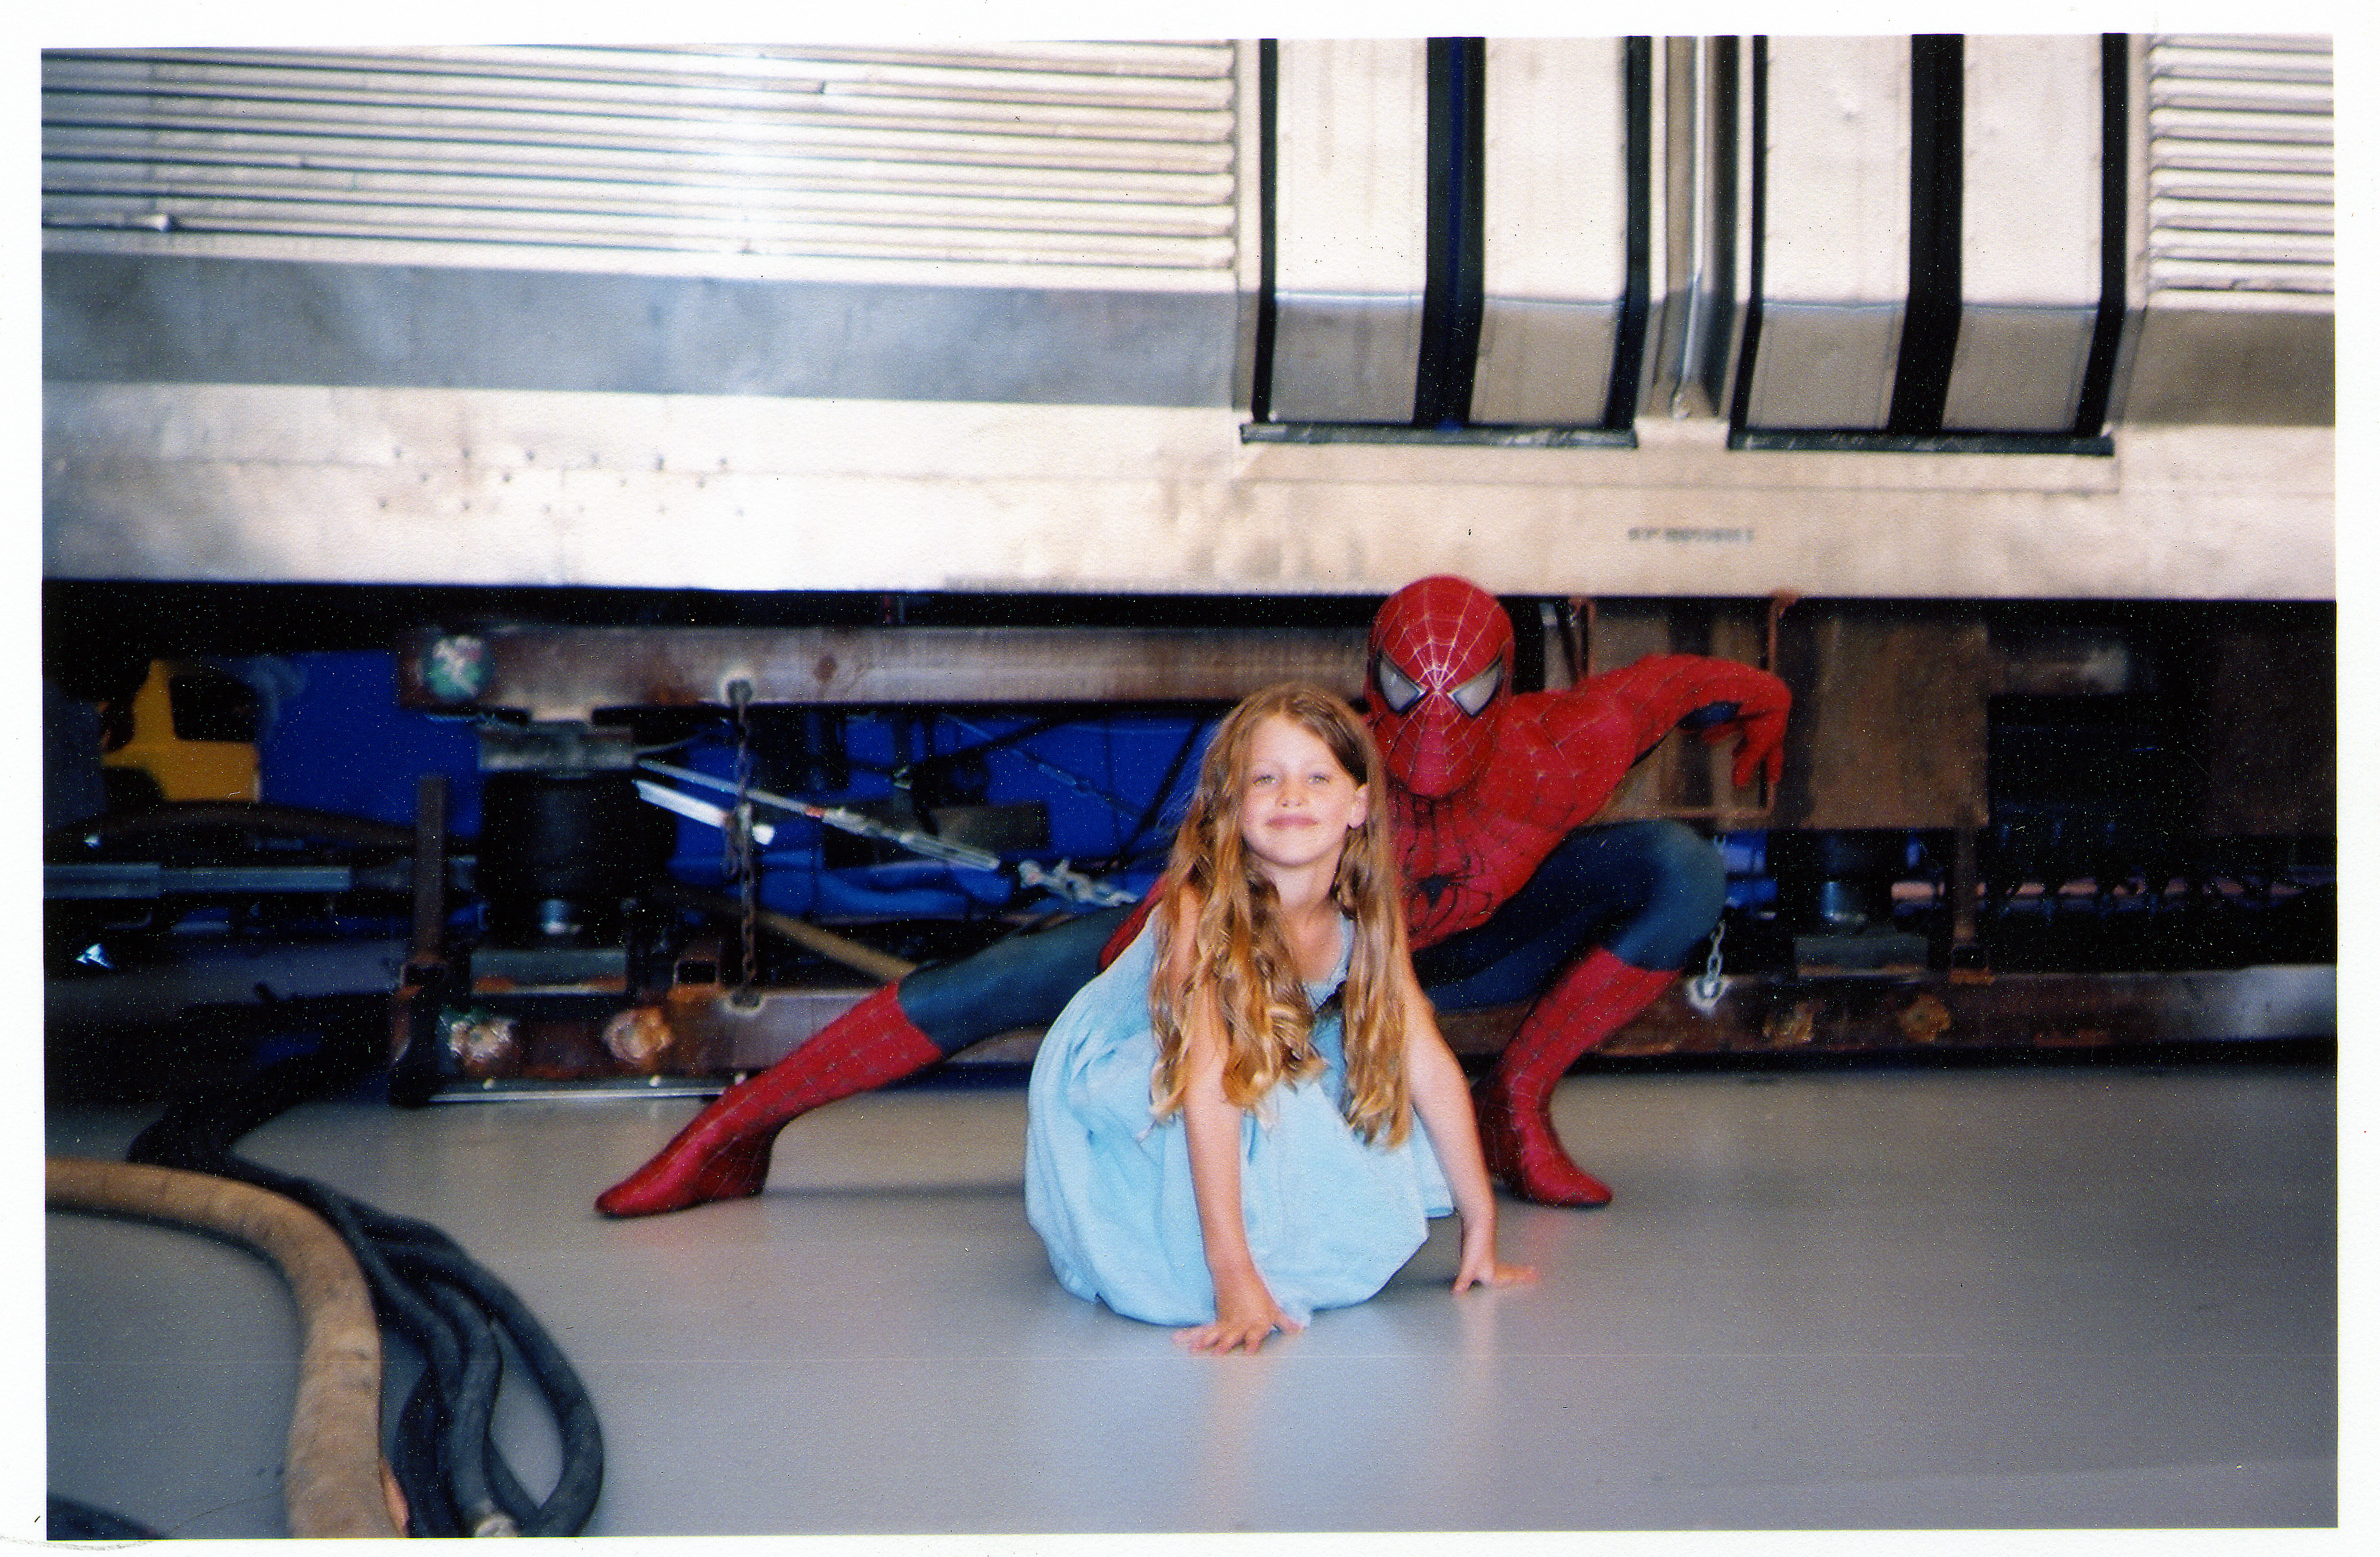 working on Spiderman 2, Los Angeles CA -5 yrs. old, 2002